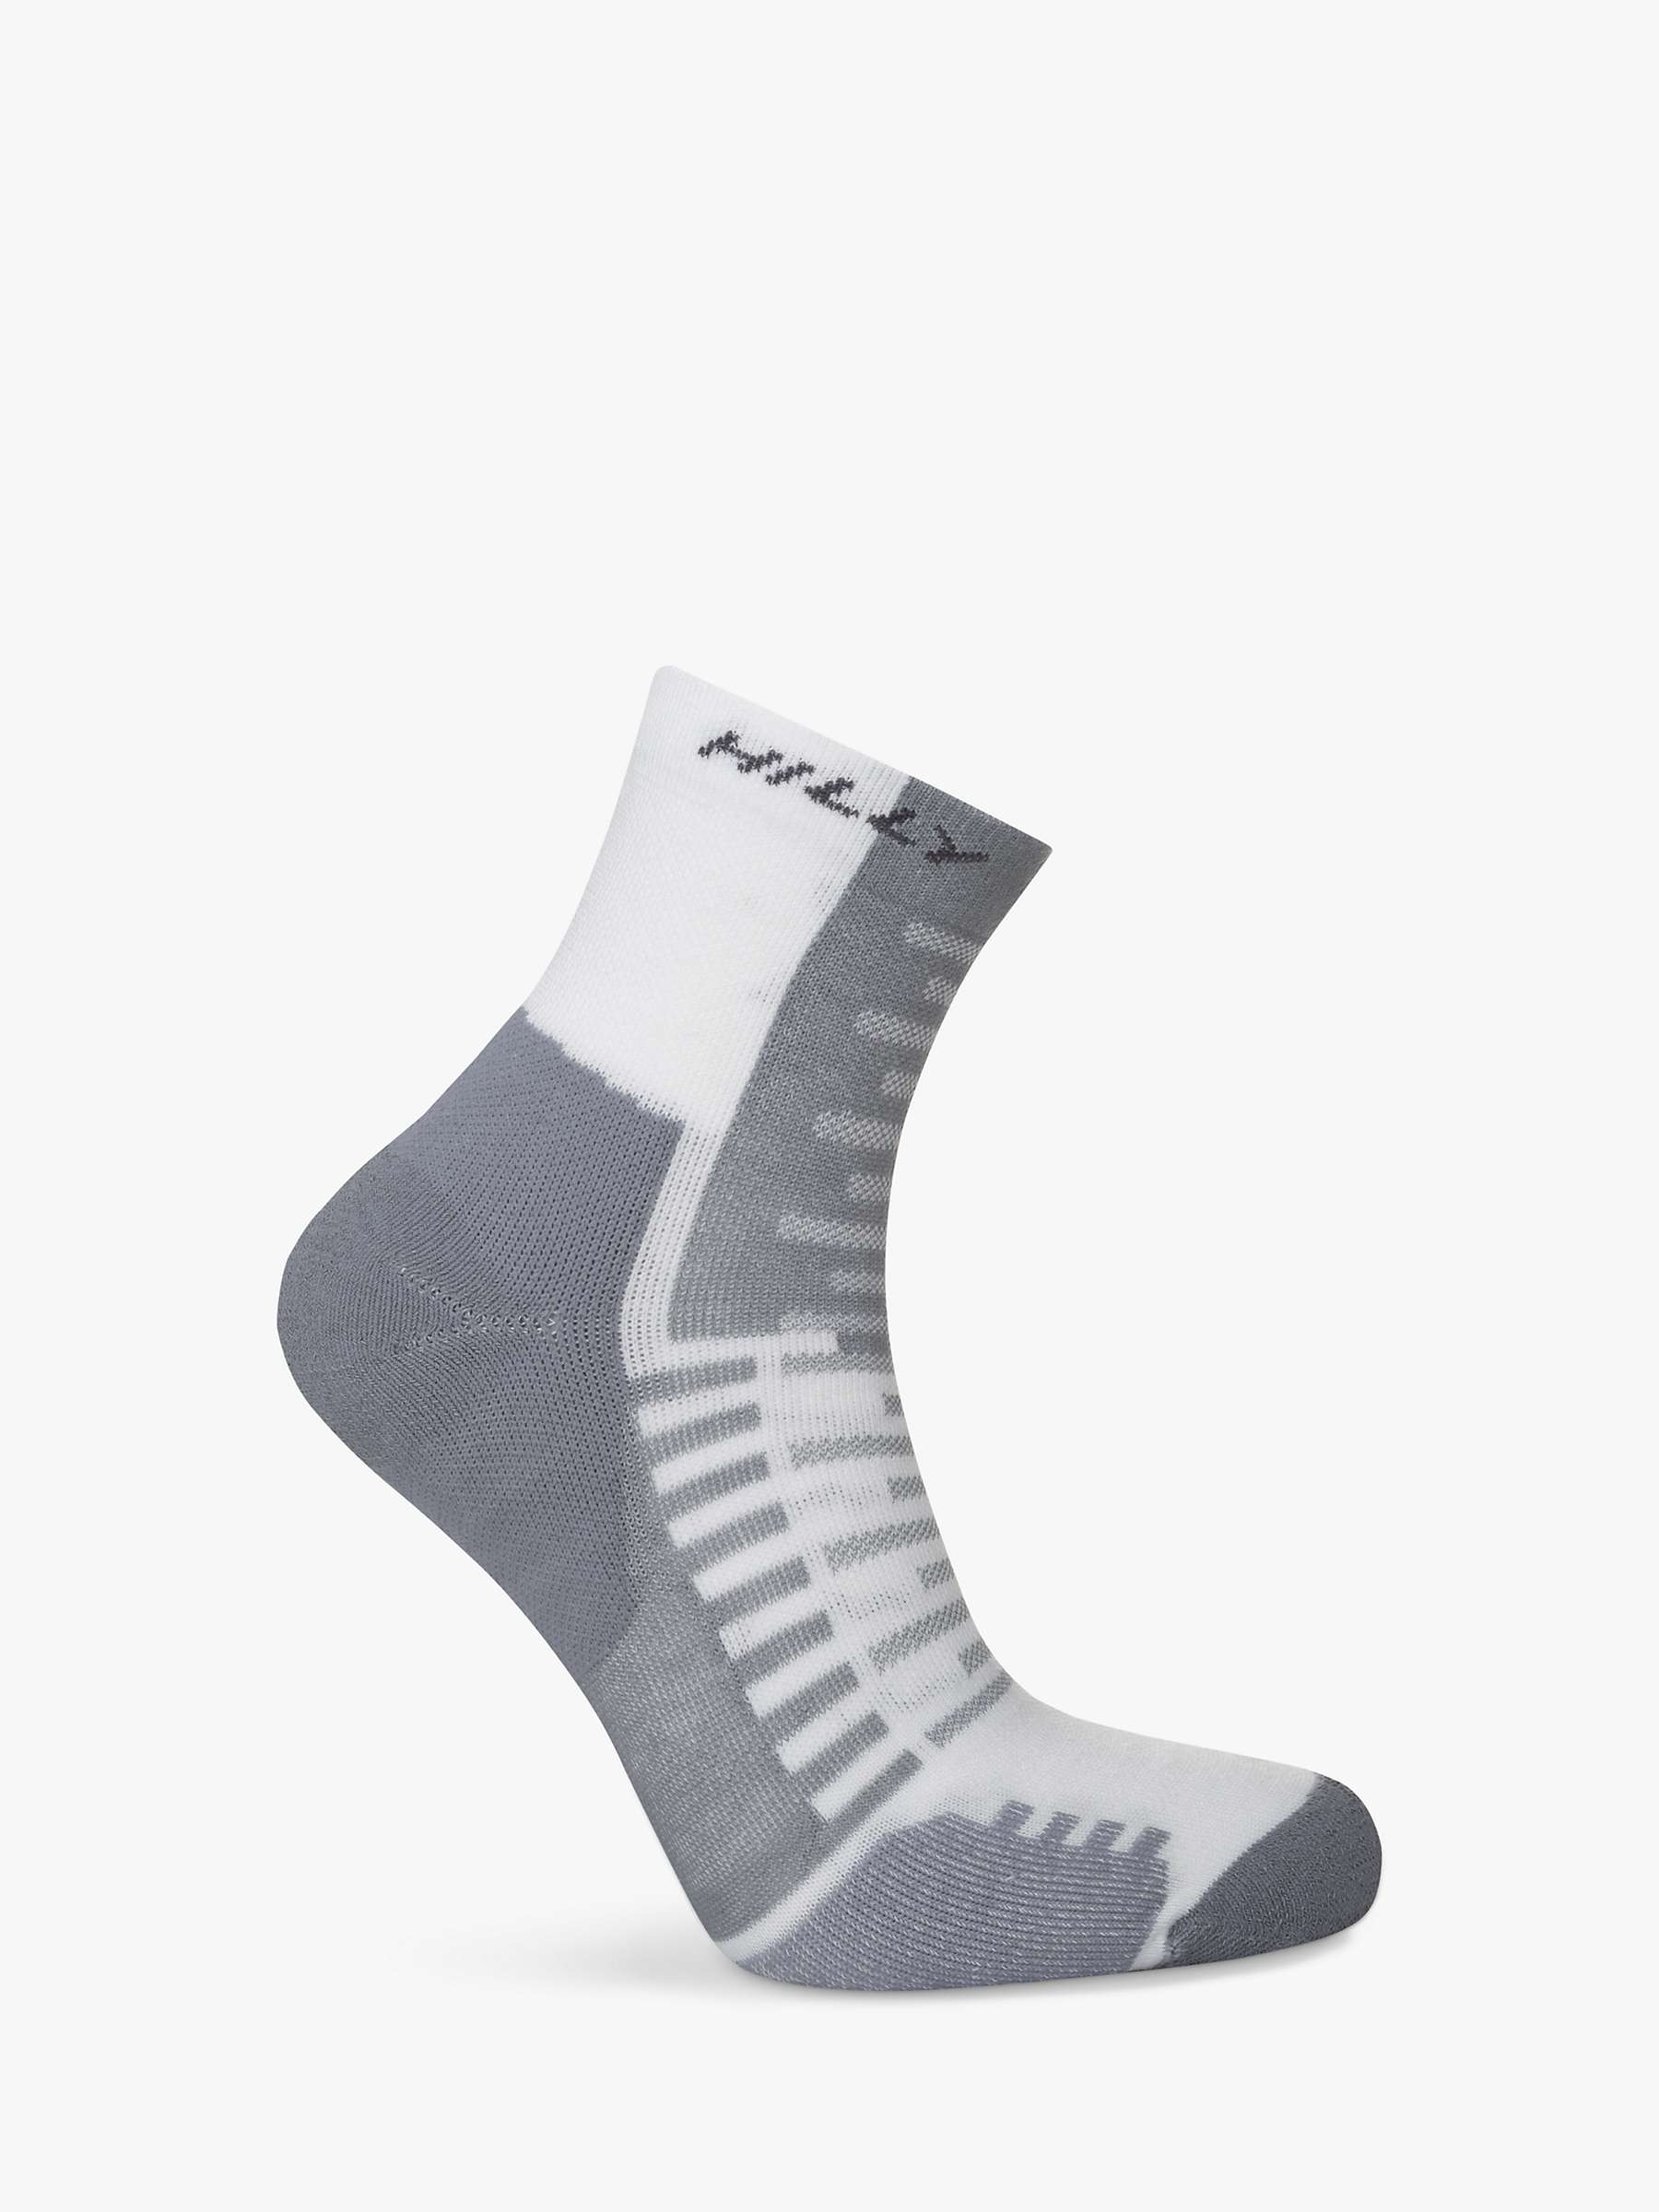 Hilly Active Ankle Running Socks at John Lewis & Partners